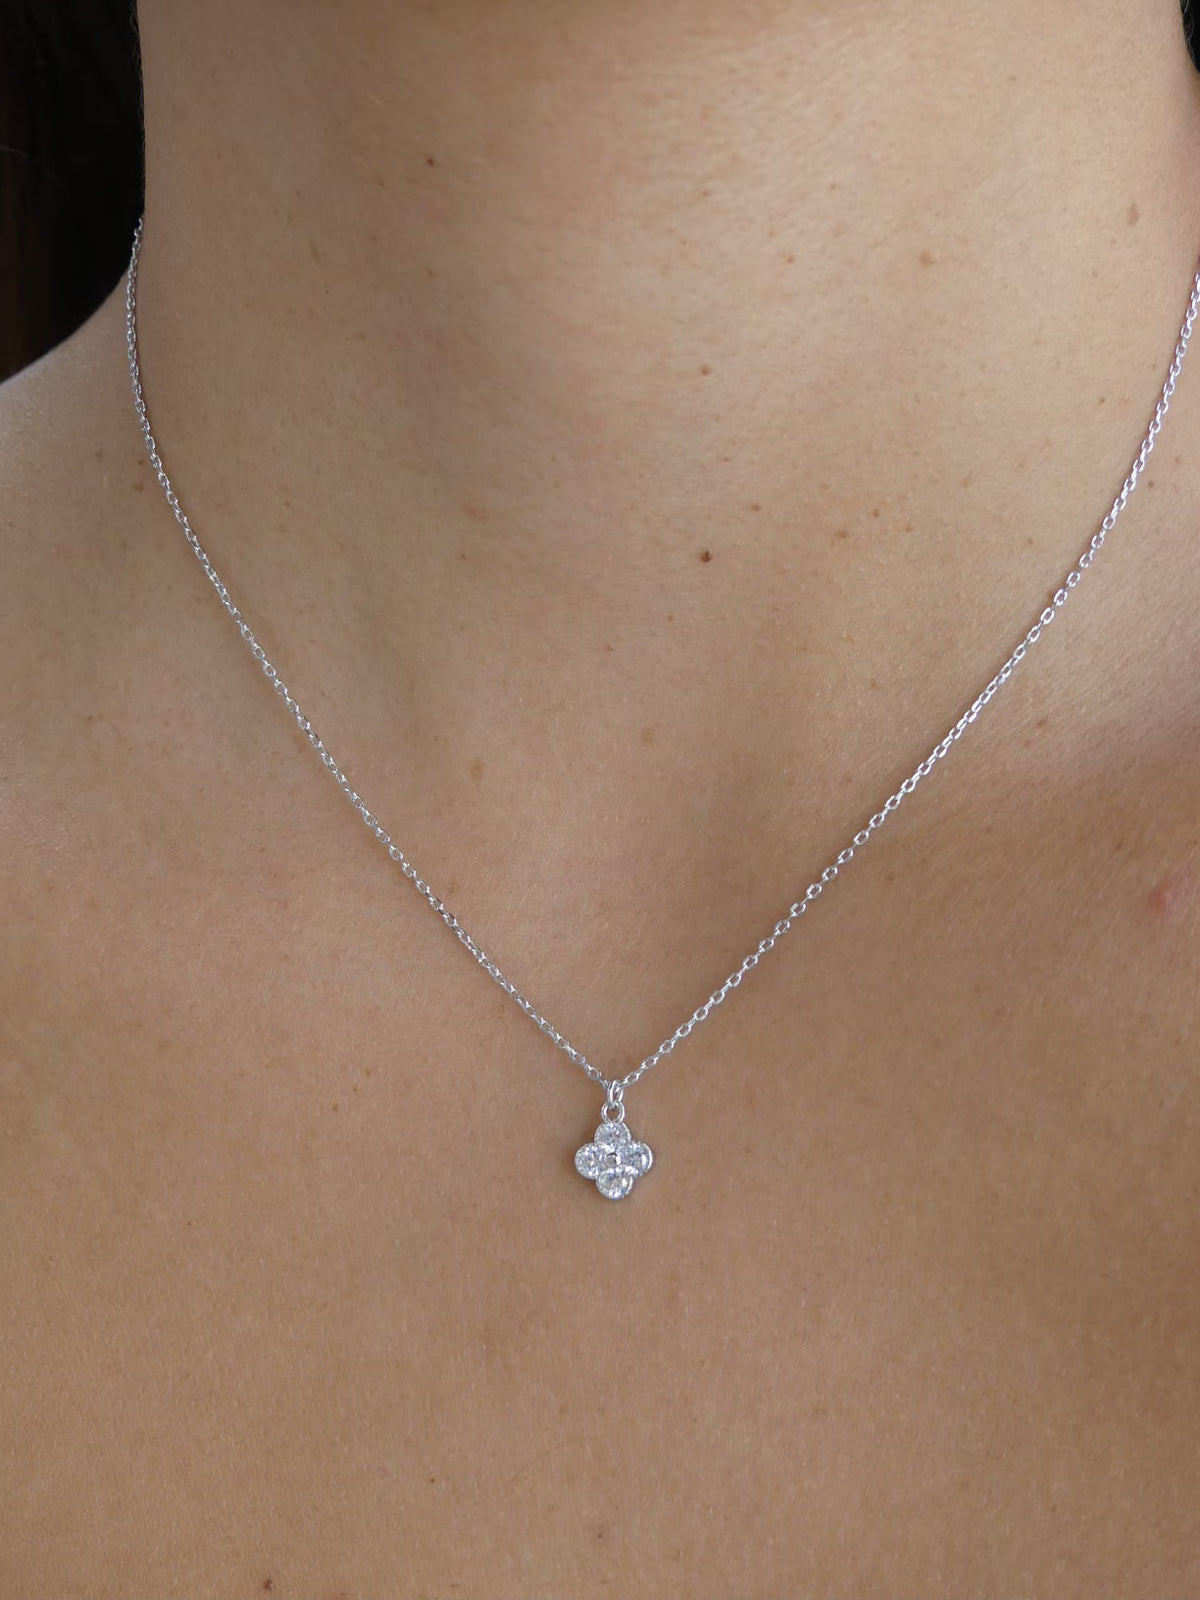 Daily Clover Silver Necklace, Diamond Cubic Zirconia .925 Dainty Sterling Silver Necklace